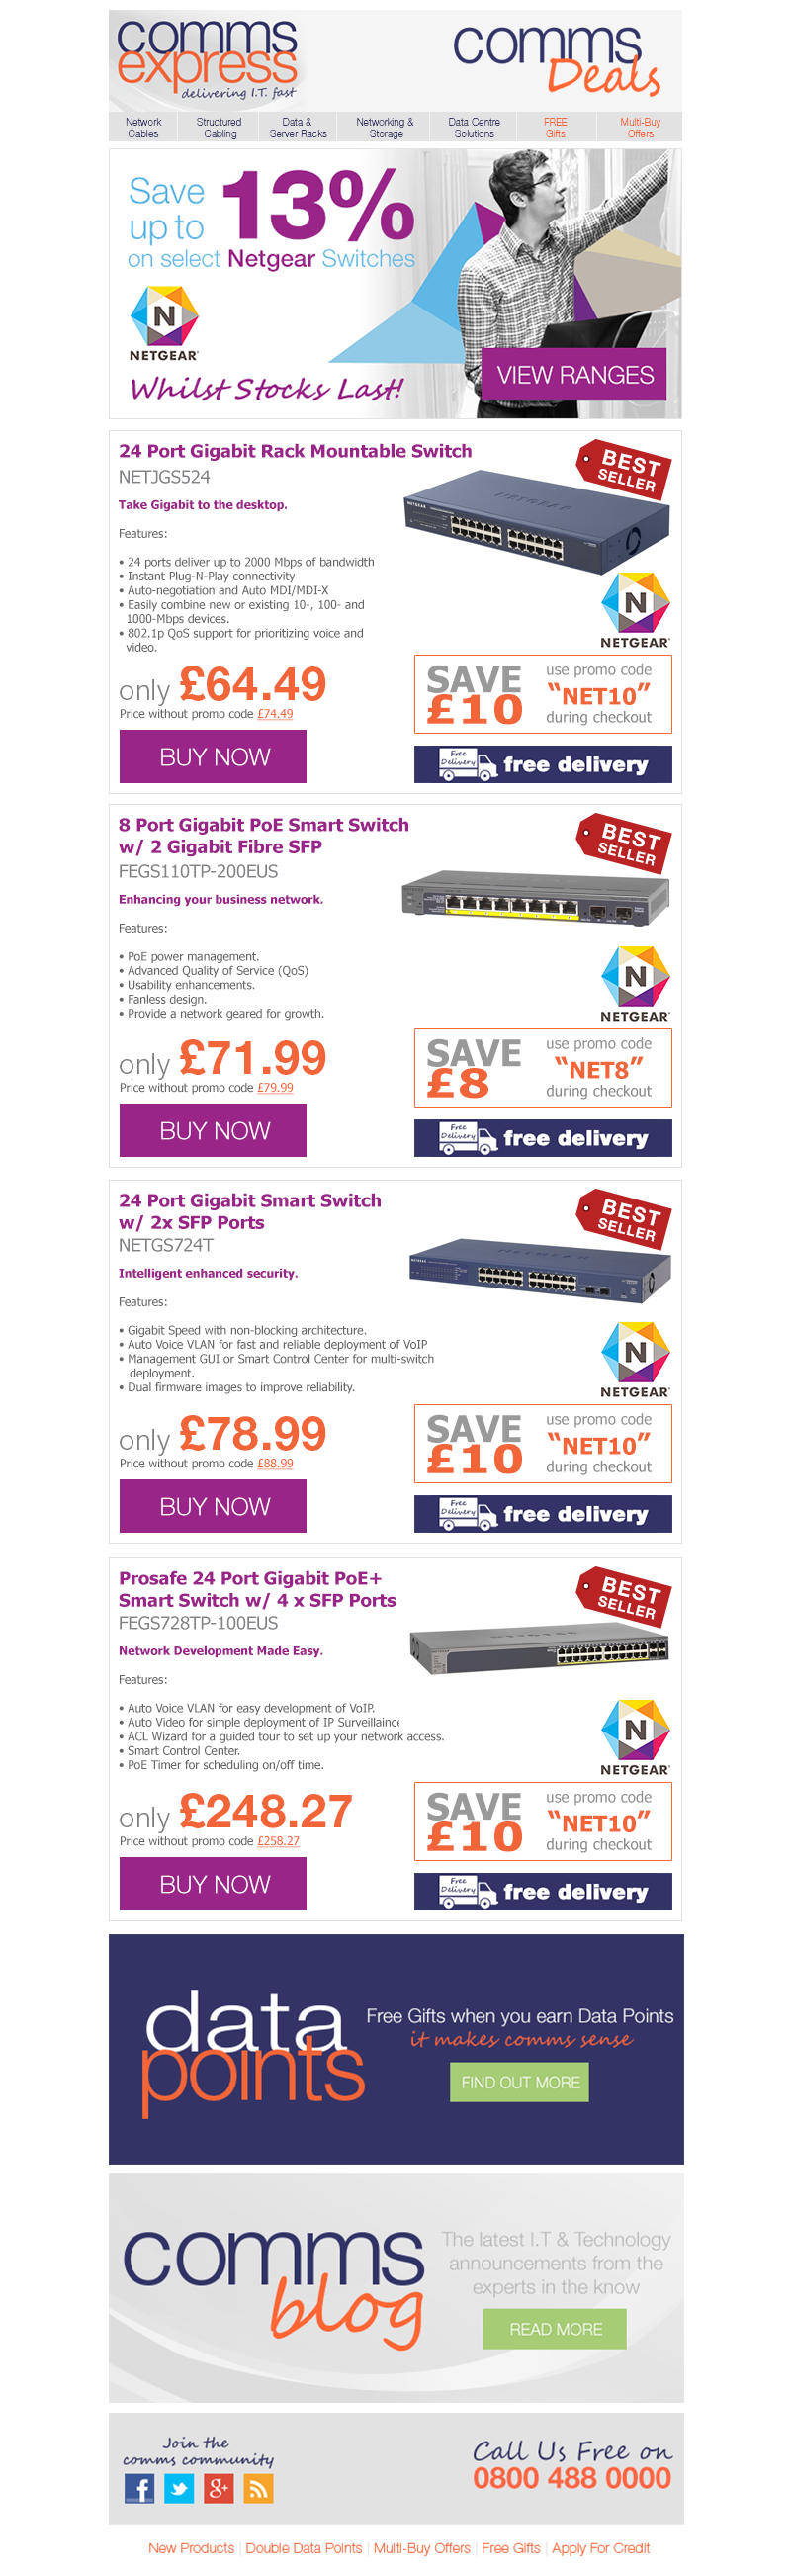 SAVE ON NETGEAR SWITCHES whilst stocks last